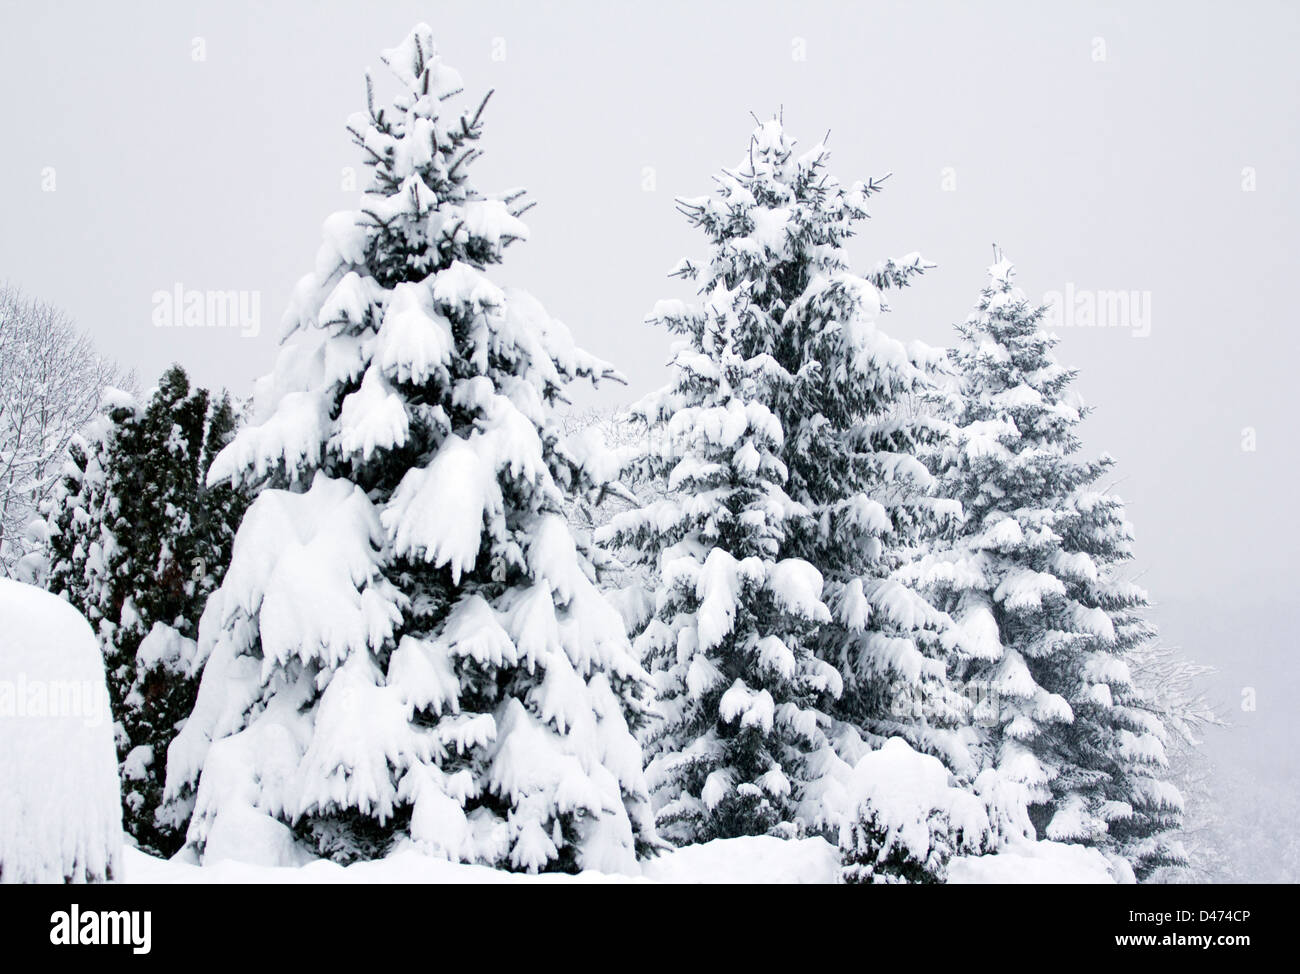 Tall spruce trees covered with snow. Stock Photo